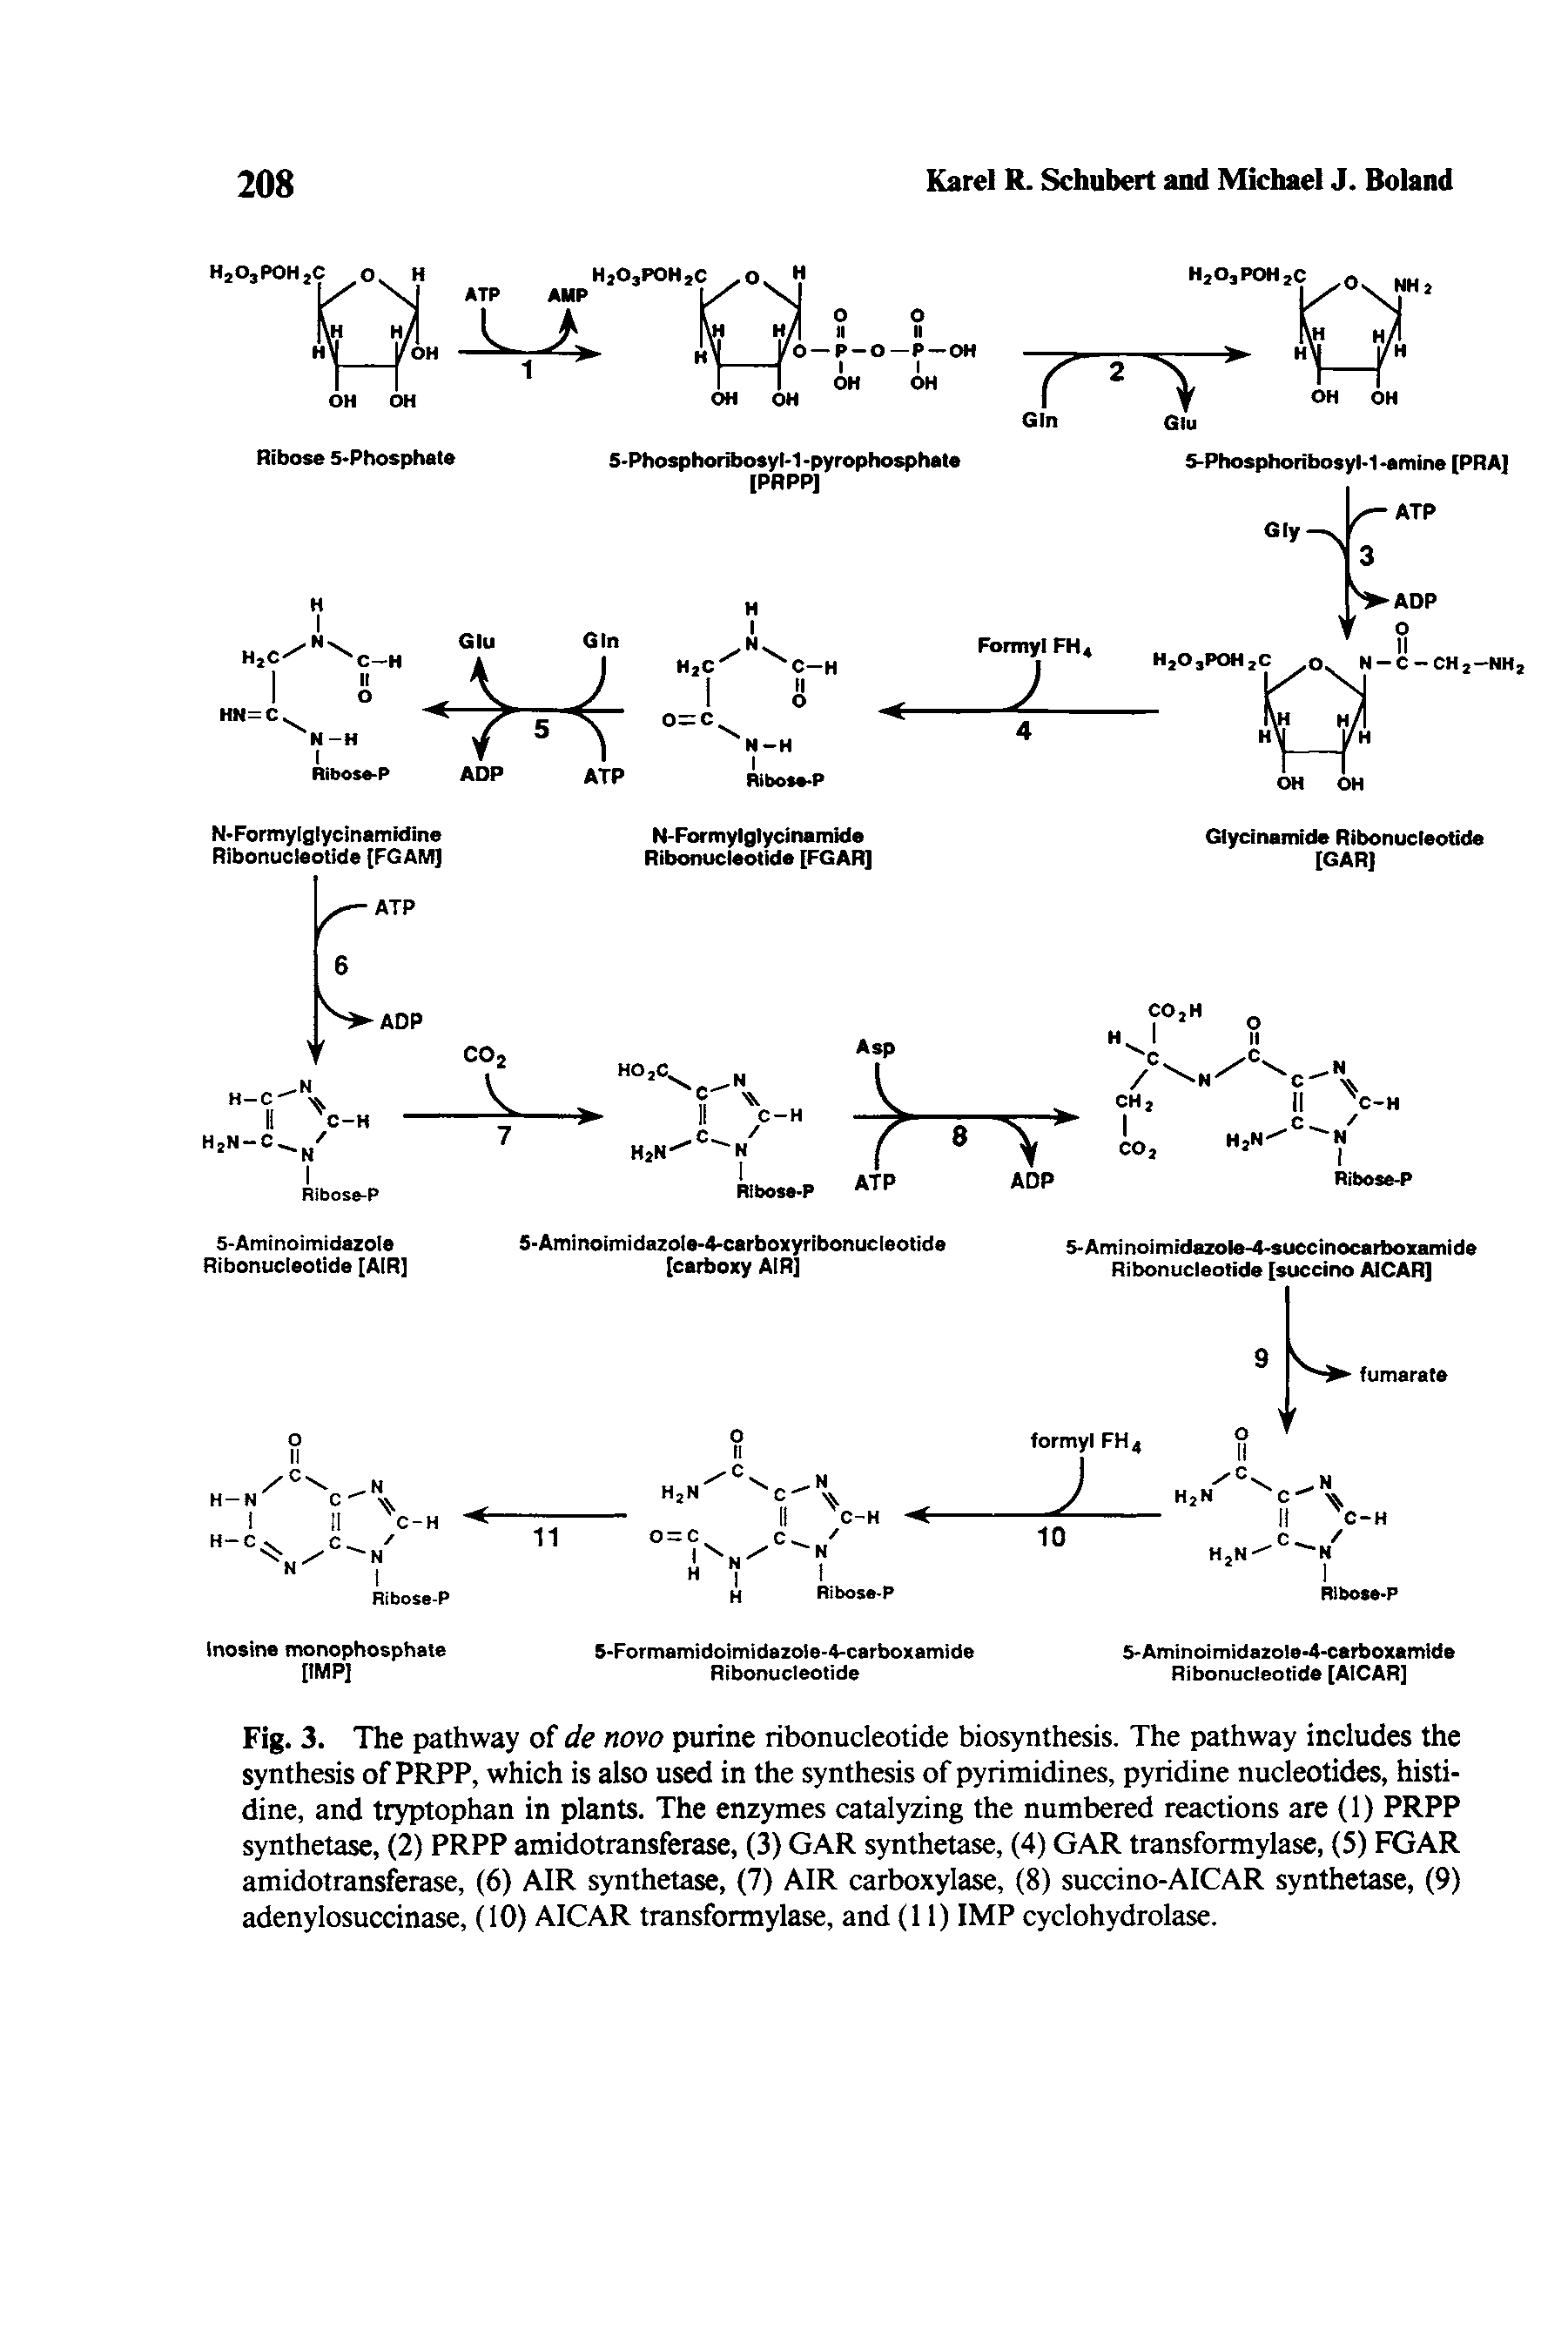 Fig. 3. The pathway of de novo purine ribonucleotide biosynthesis. The pathway includes the synthesis of PRPP, which is also used in the synthesis of pyrimidines, pyridine nucleotides, histidine, and tryptophan in plants. The enzymes catalyzing the numbered reactions are (1) PRPP synthetase, (2) PRPP amidotransferase, (3) GAR synthetase, (4) GAR transformylase, (5) FGAR amidotransferase, (6) AIR synthetase, (7) AIR carboxylase, (8) succino-AICAR synthetase, (9) adenylosuccinase, (10) AICAR transformylase, and (11) IMP cyclohydrolase.